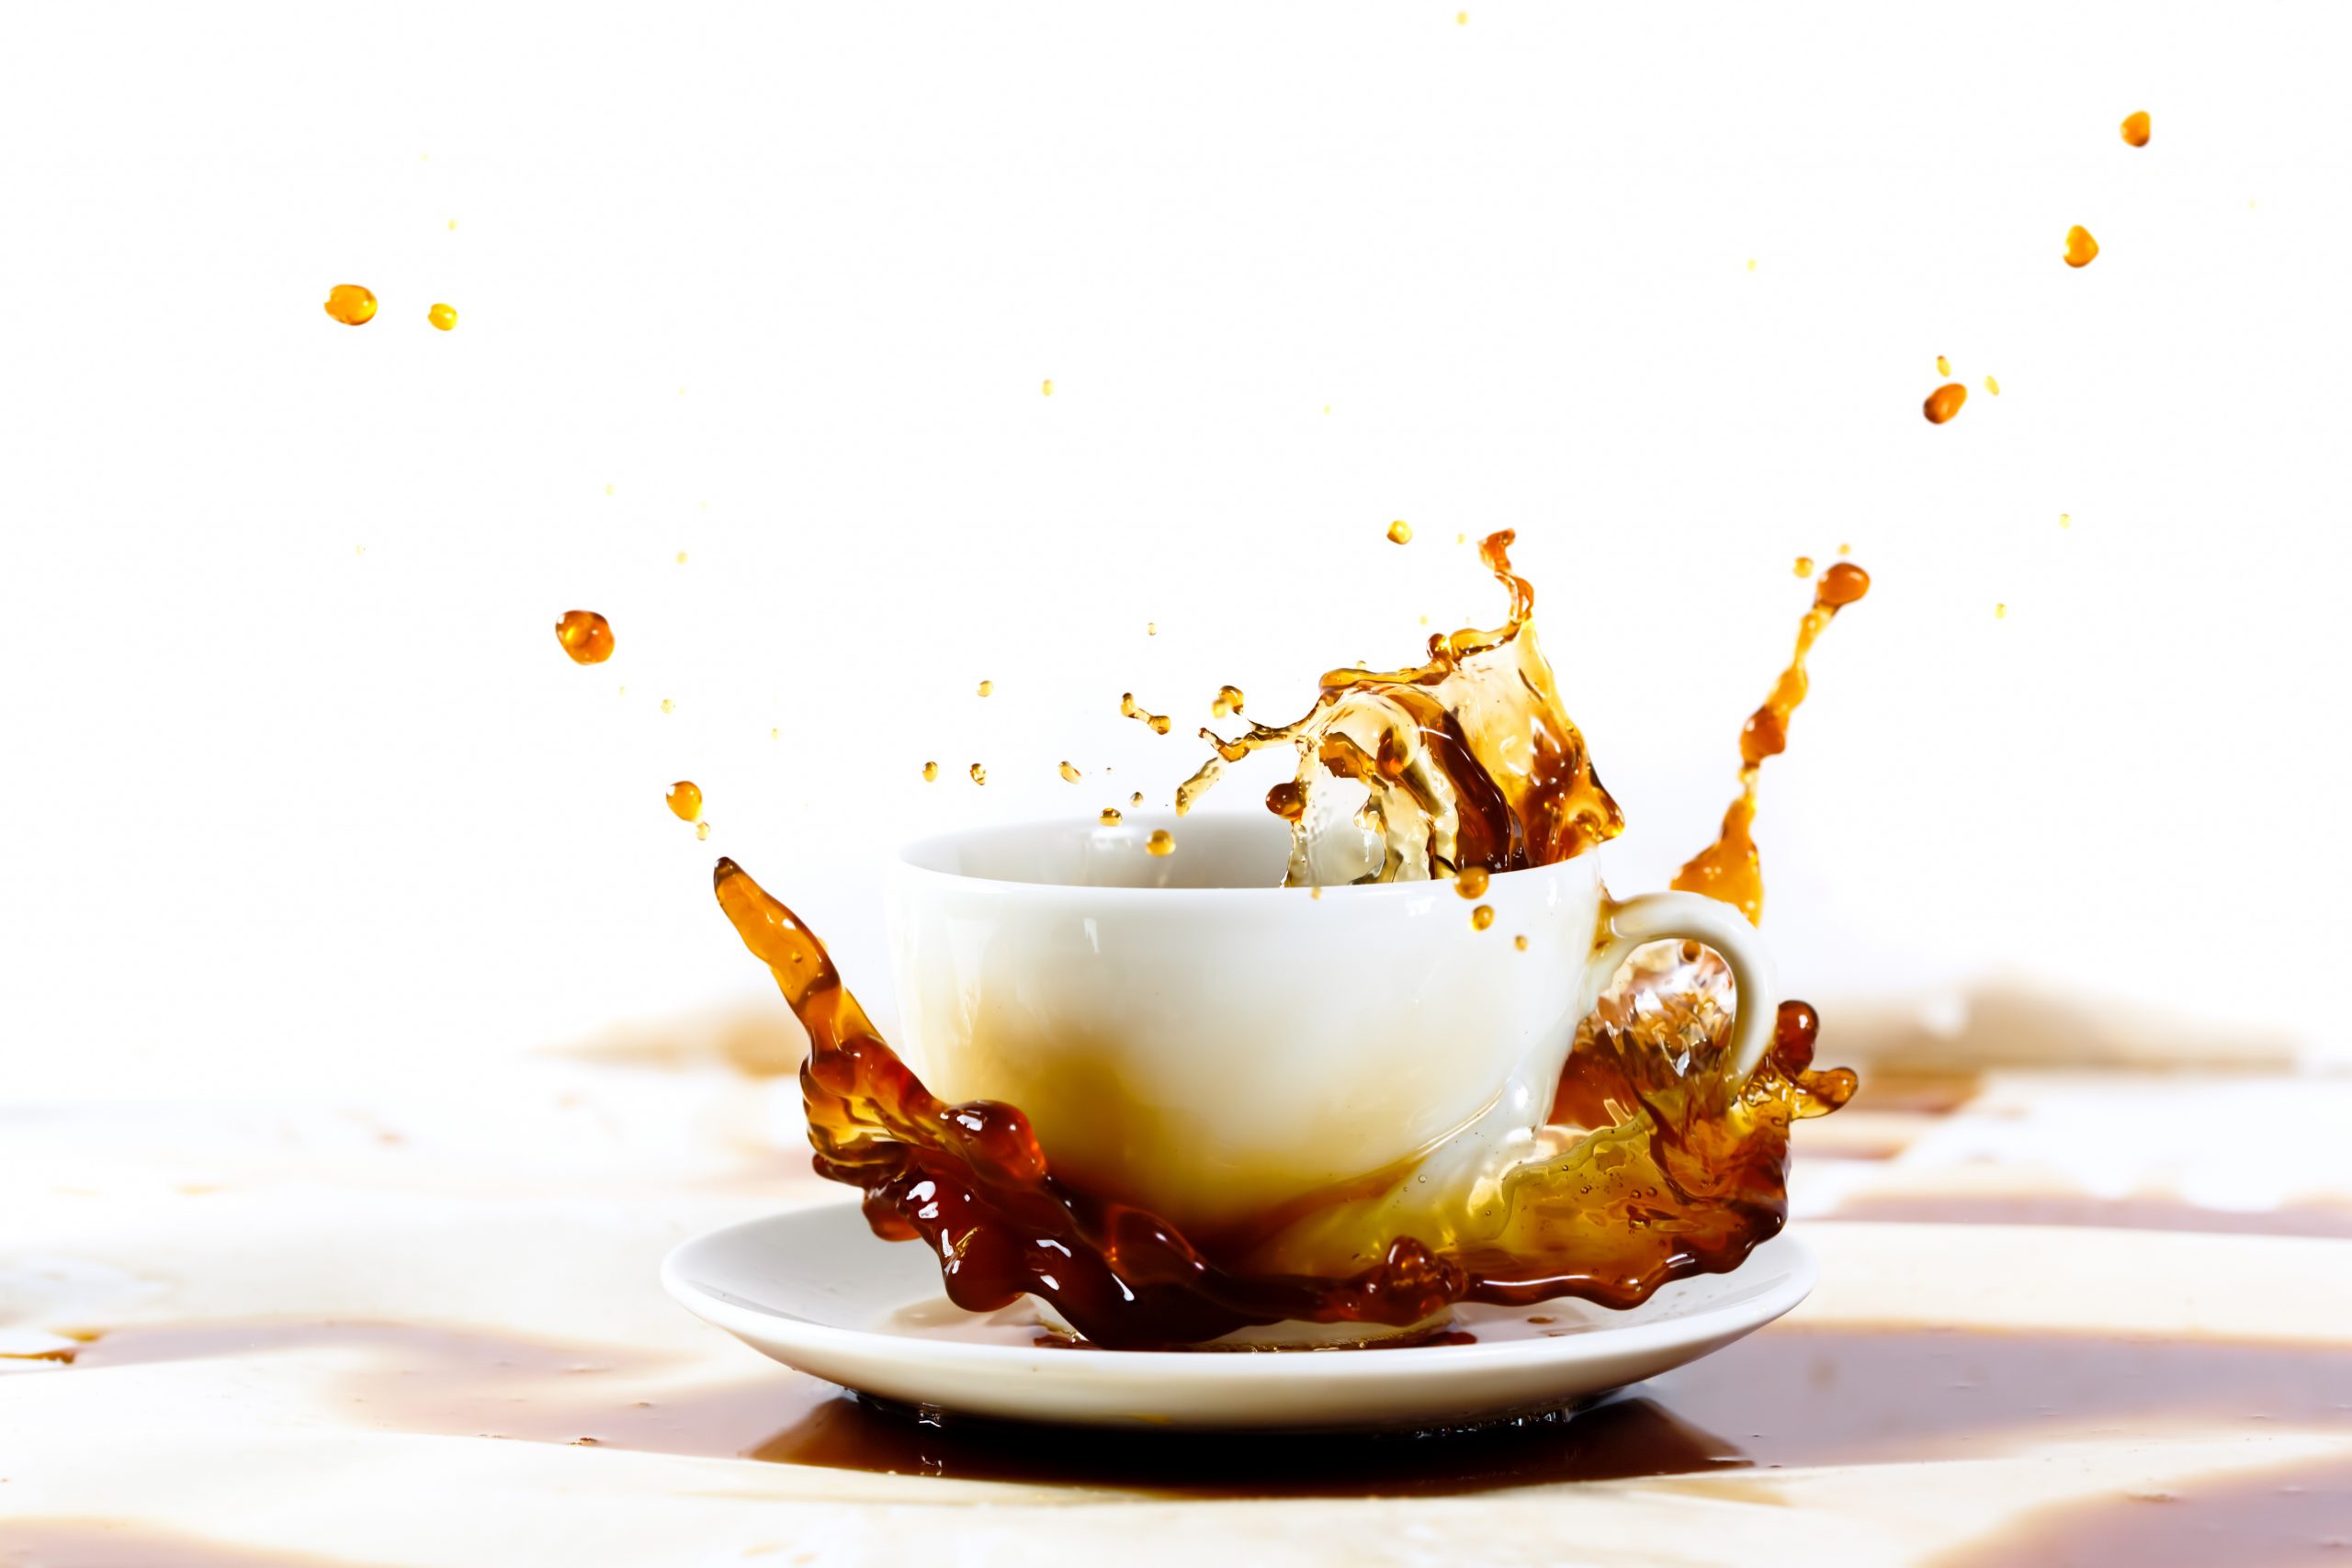 Cup of coffee creating splash. White background, coffee stains. Coffee break, breakfast concept.